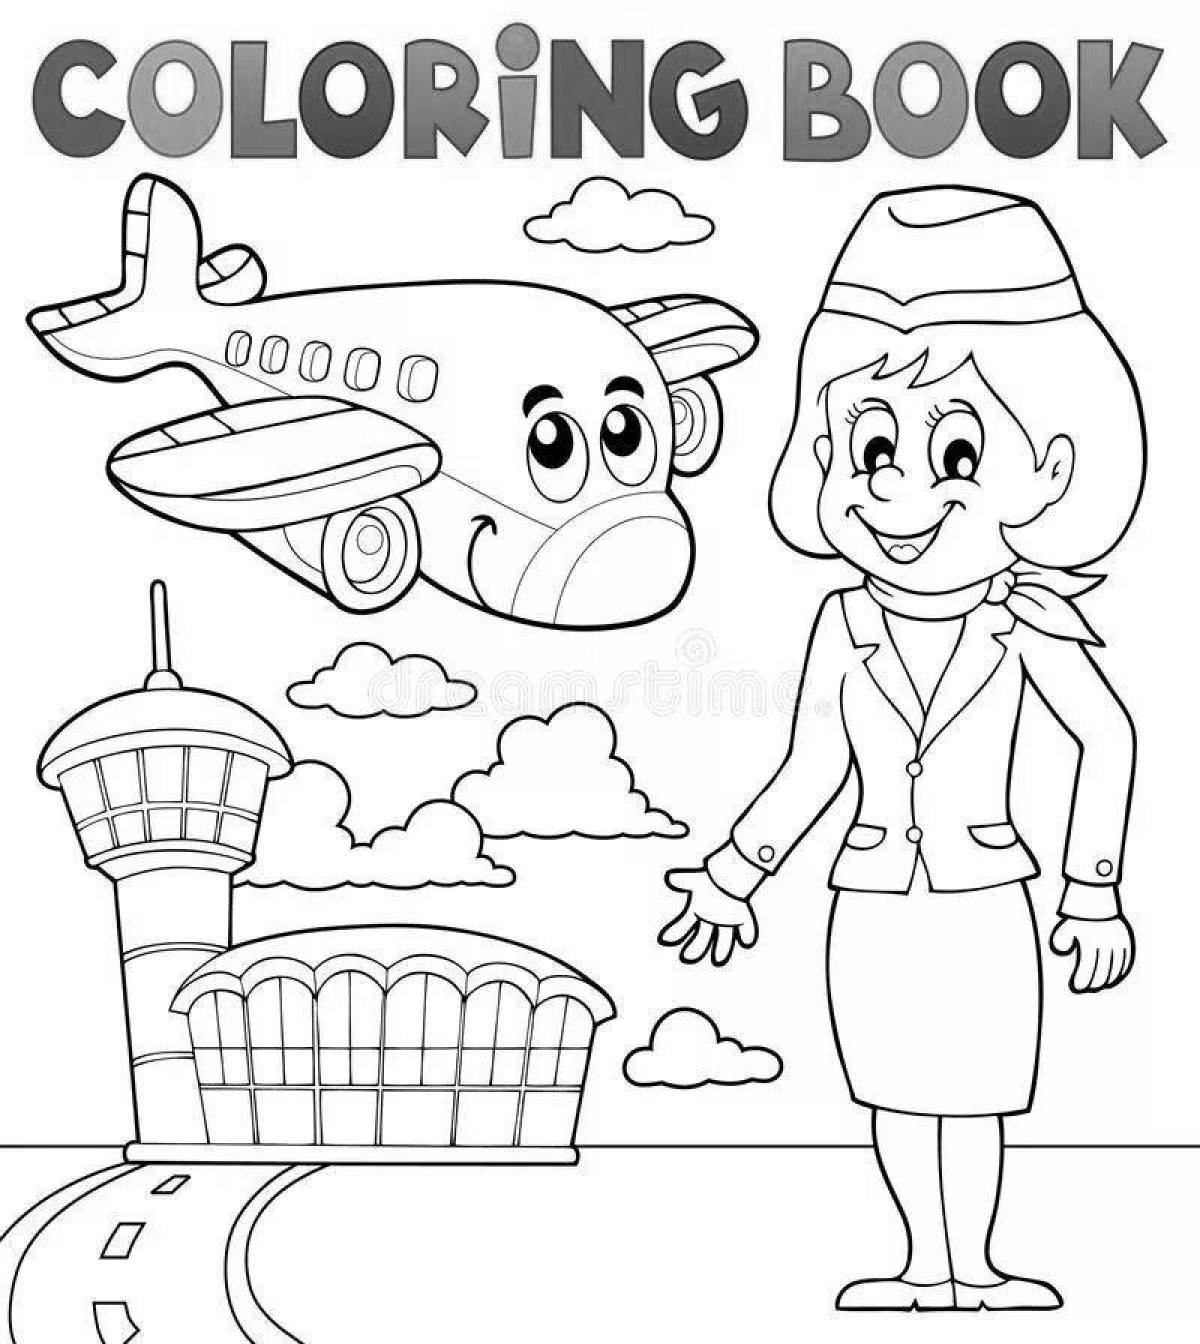 Coloring page graceful stewardess